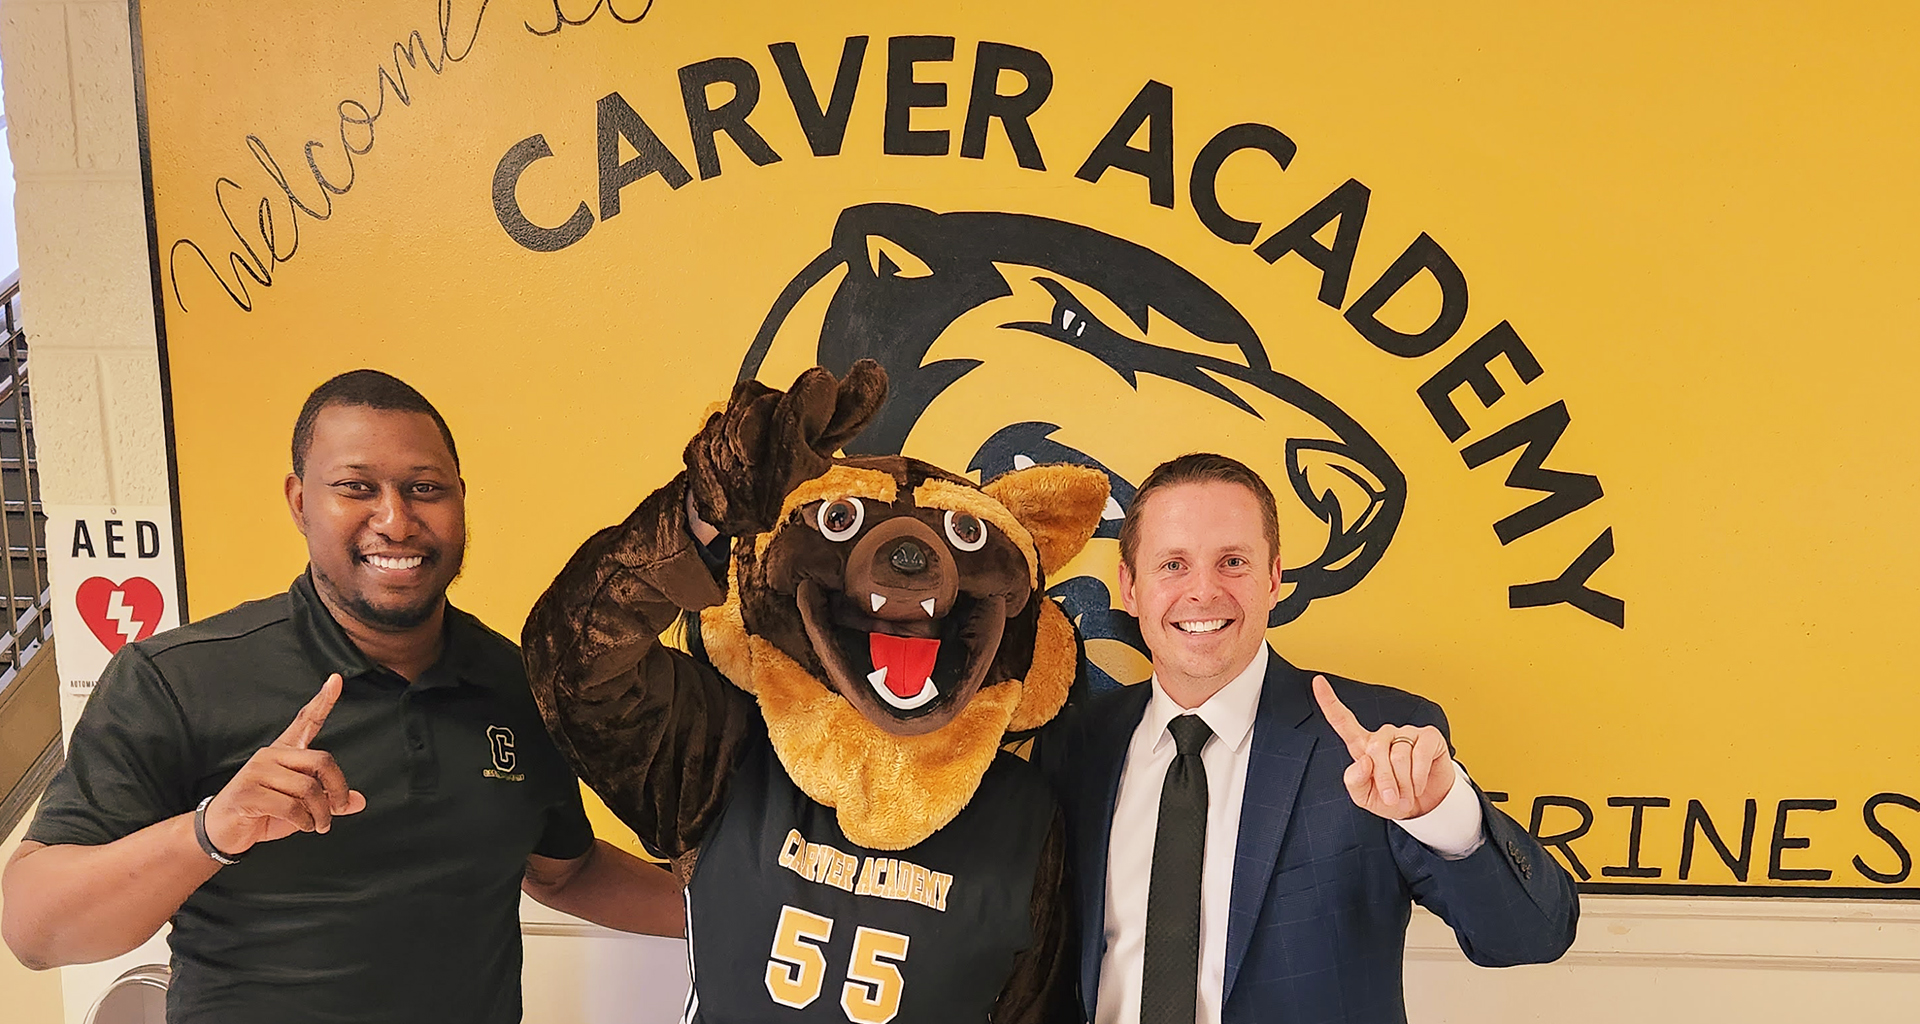 Principal and AP pose with mascot in front of welcome sign